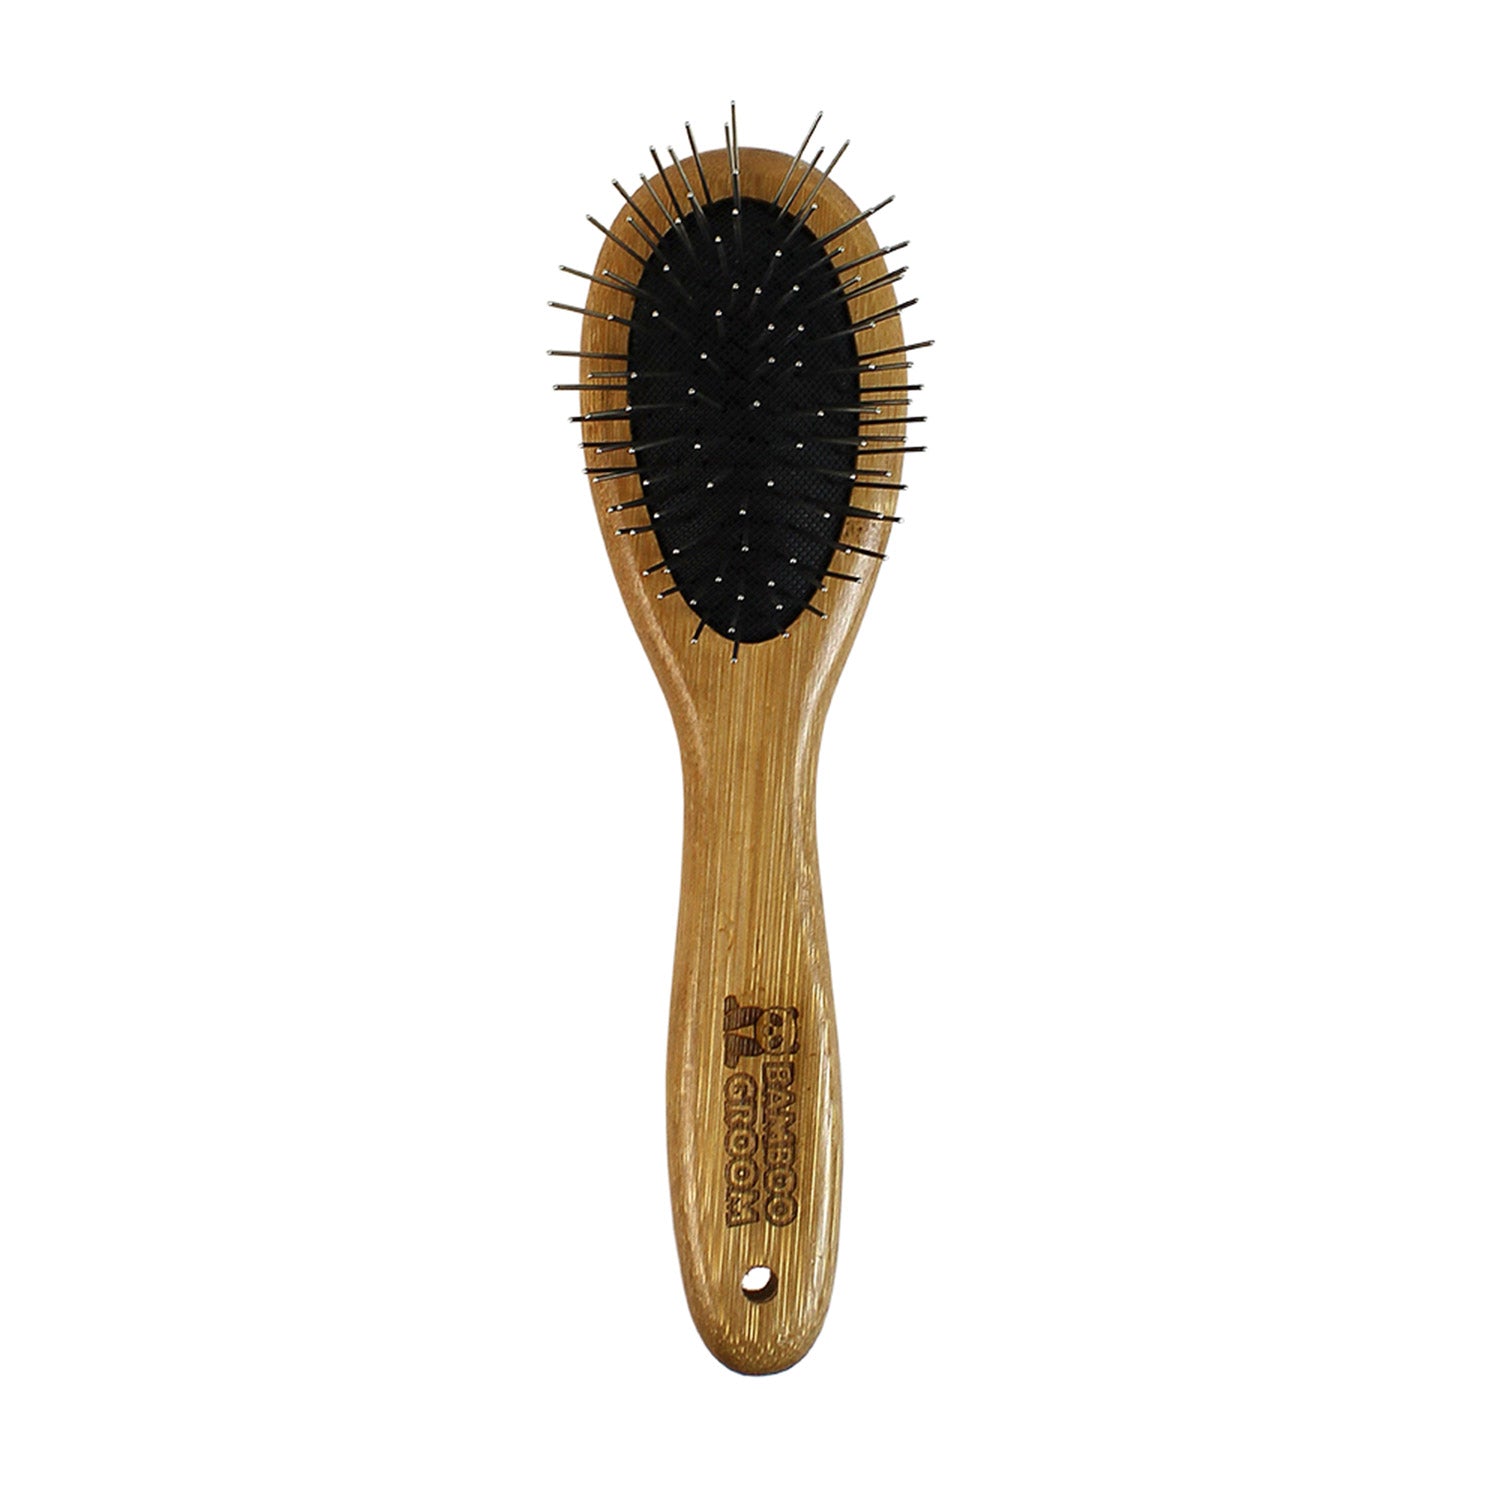 Bamboo Groom Oval Pin Brush with Stainless Steel Pins - Small/Medium